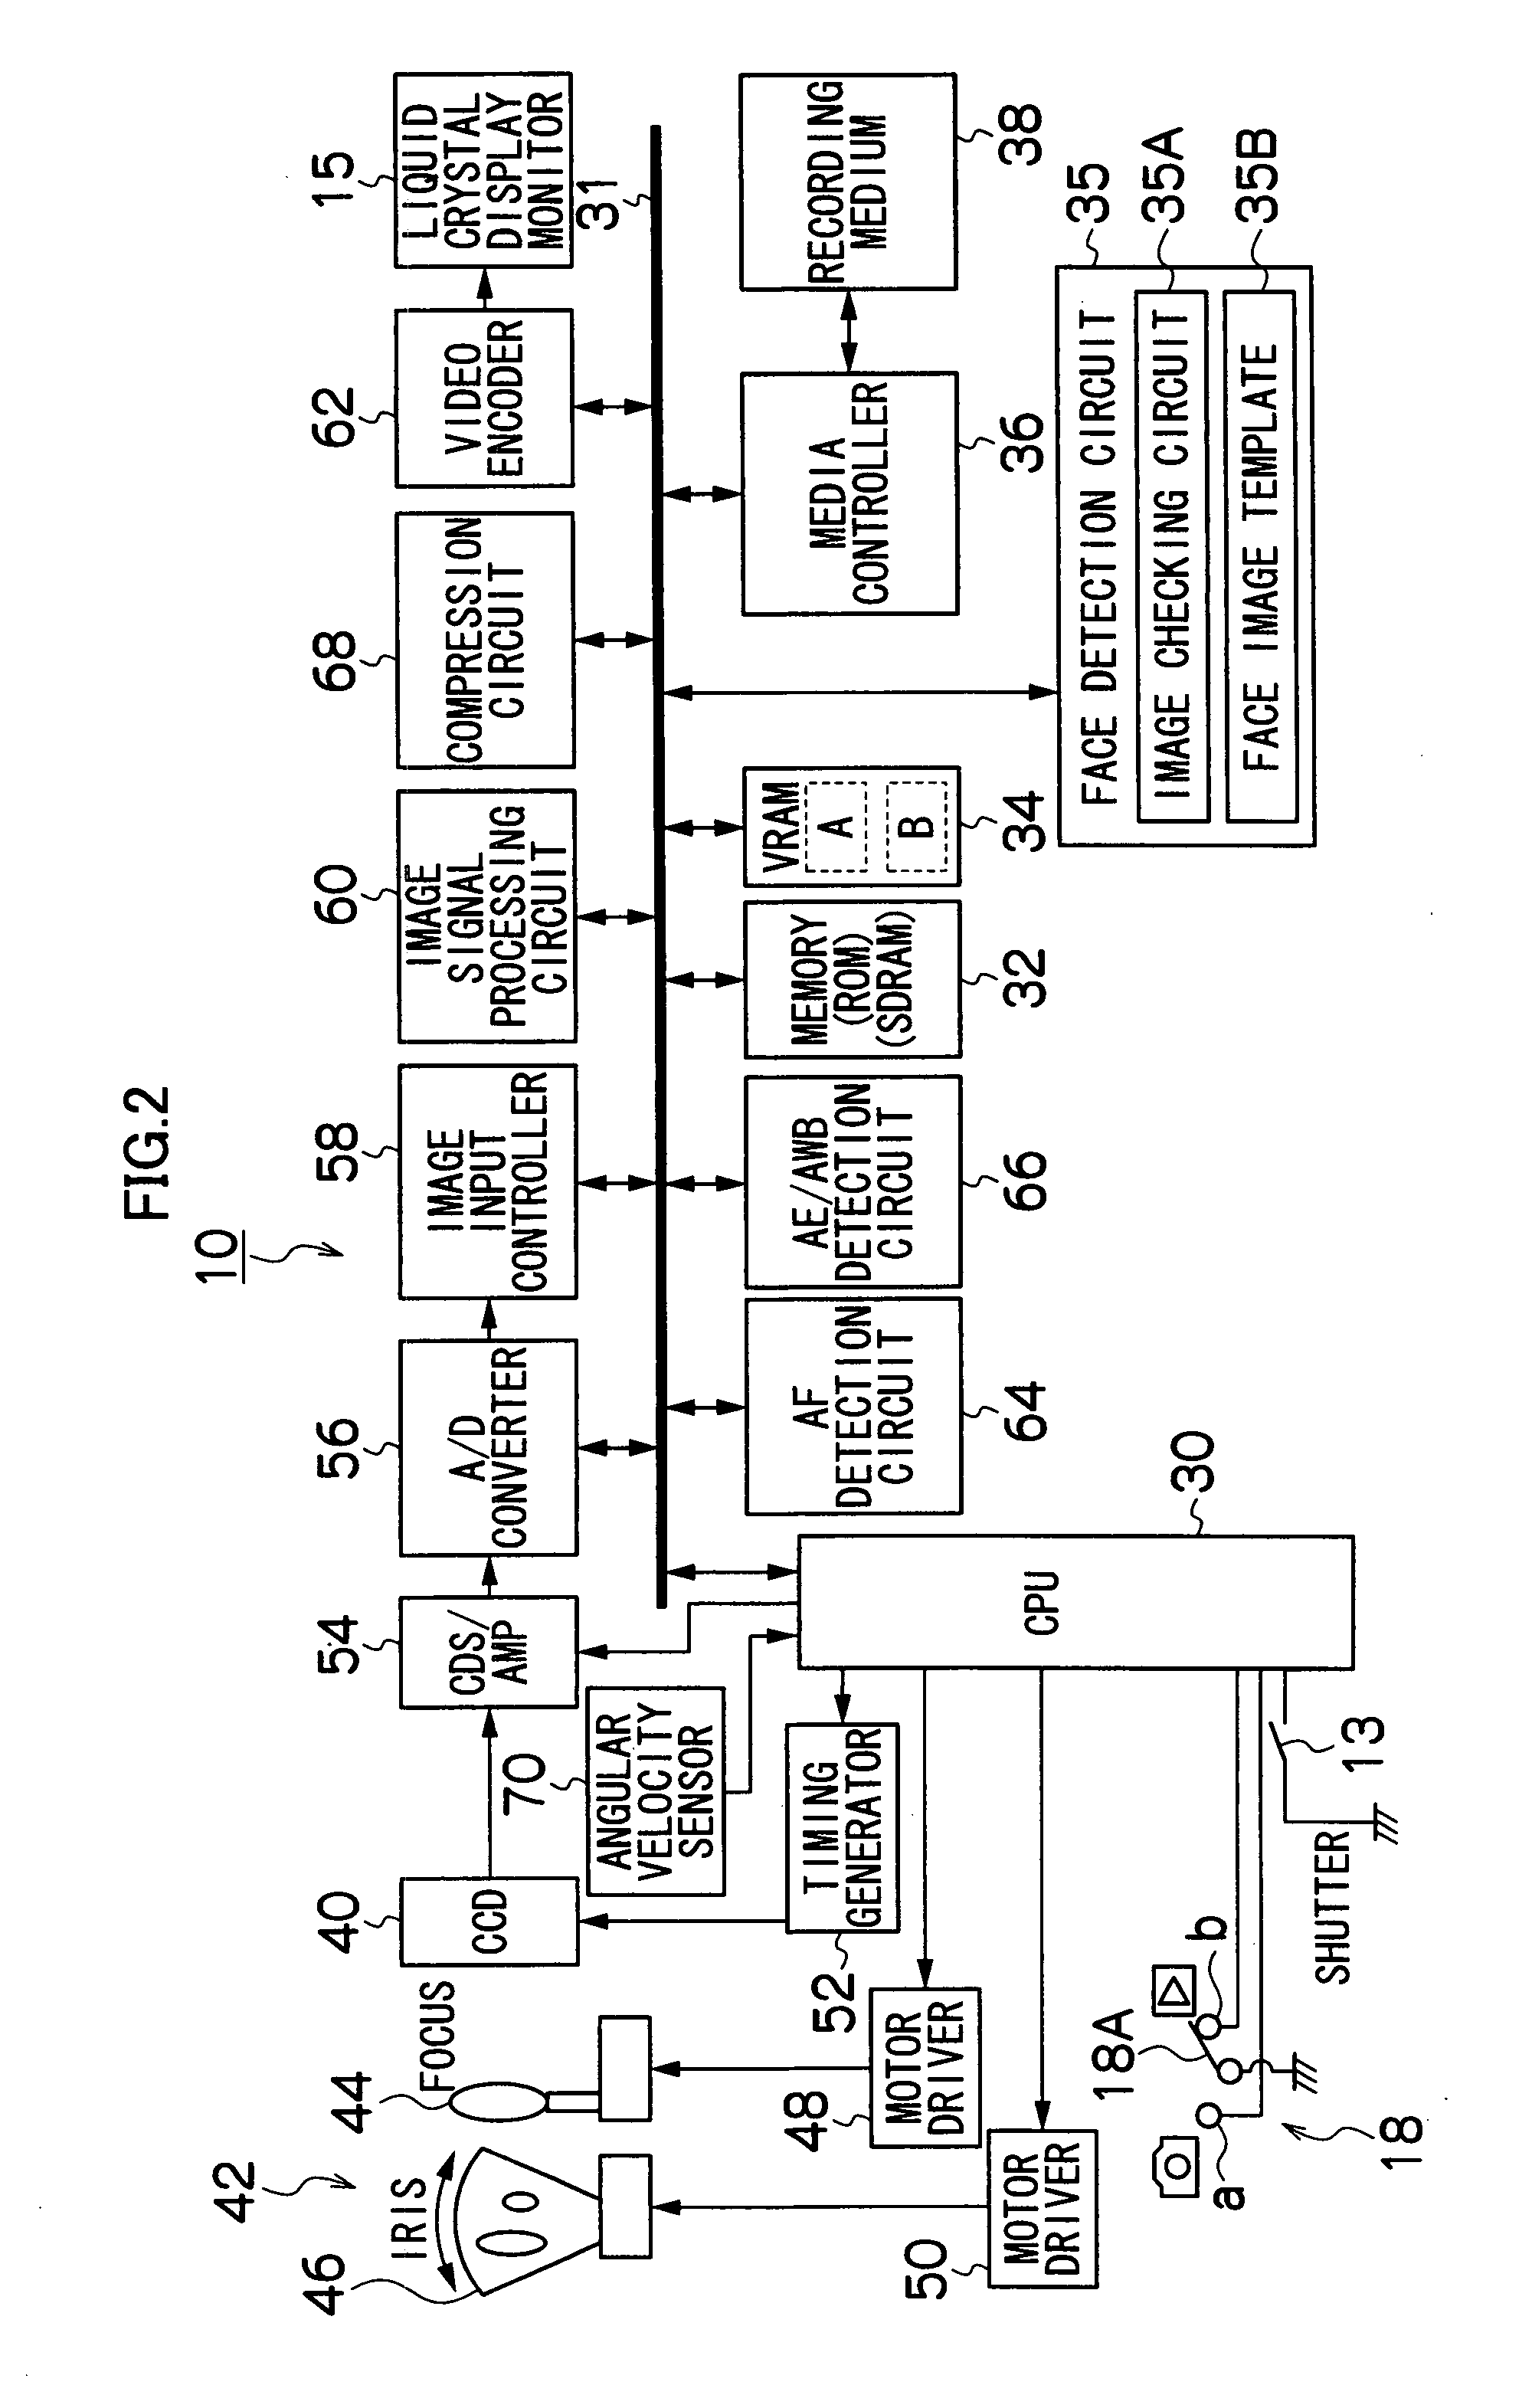 Method for displaying face detection frame, method for displaying character information, and image-taking device